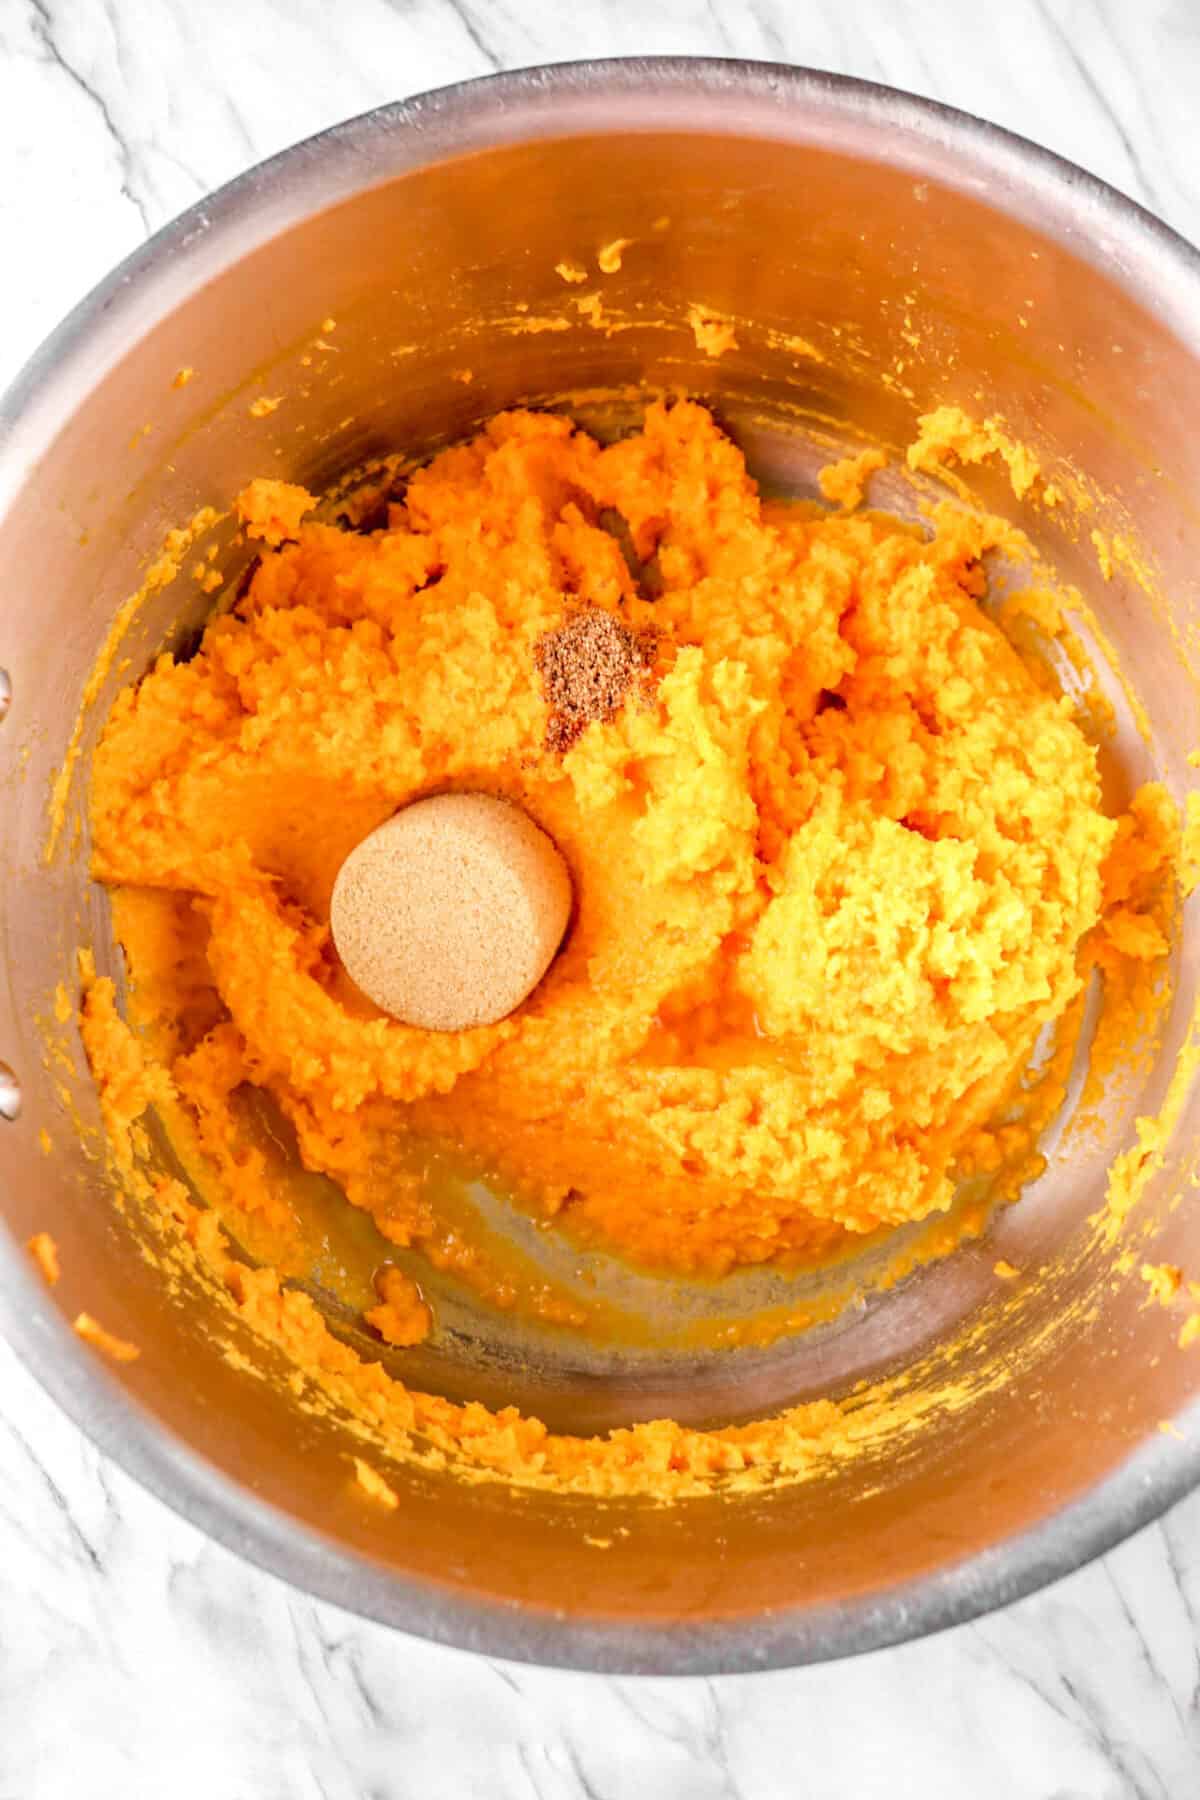 brown sugar, nutmeg, and bourbon added to sweet potatoes